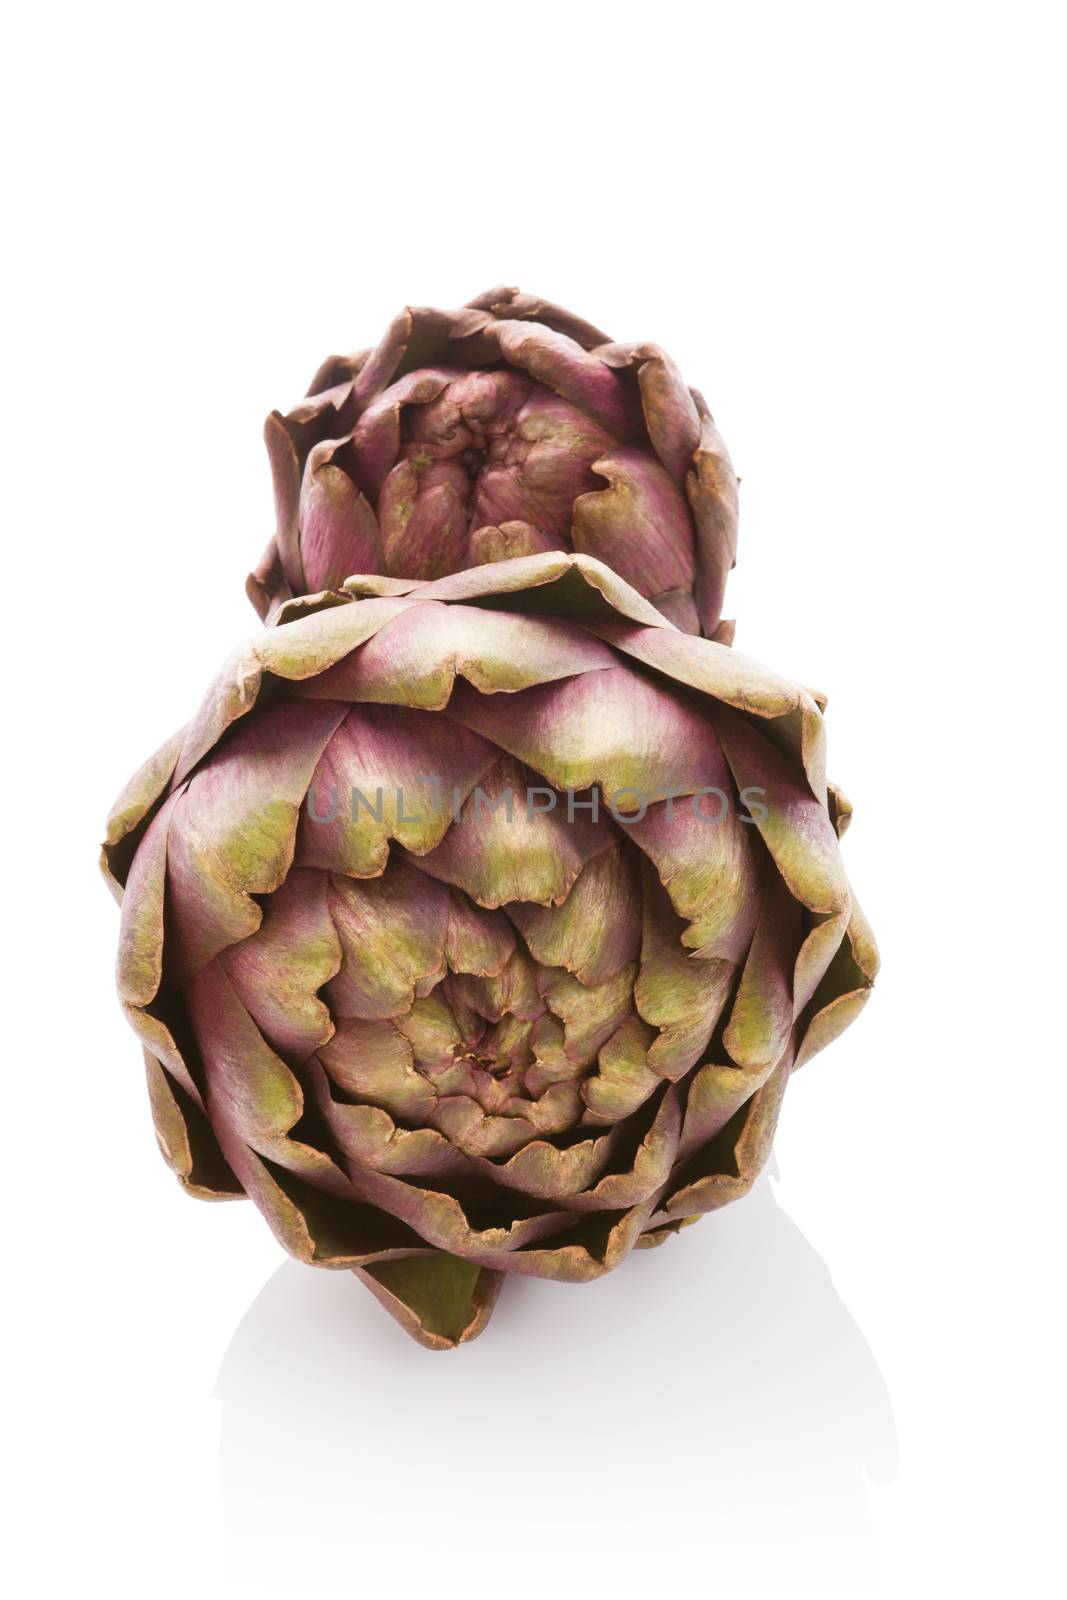 Artichoke isolated on white background. by eskymaks